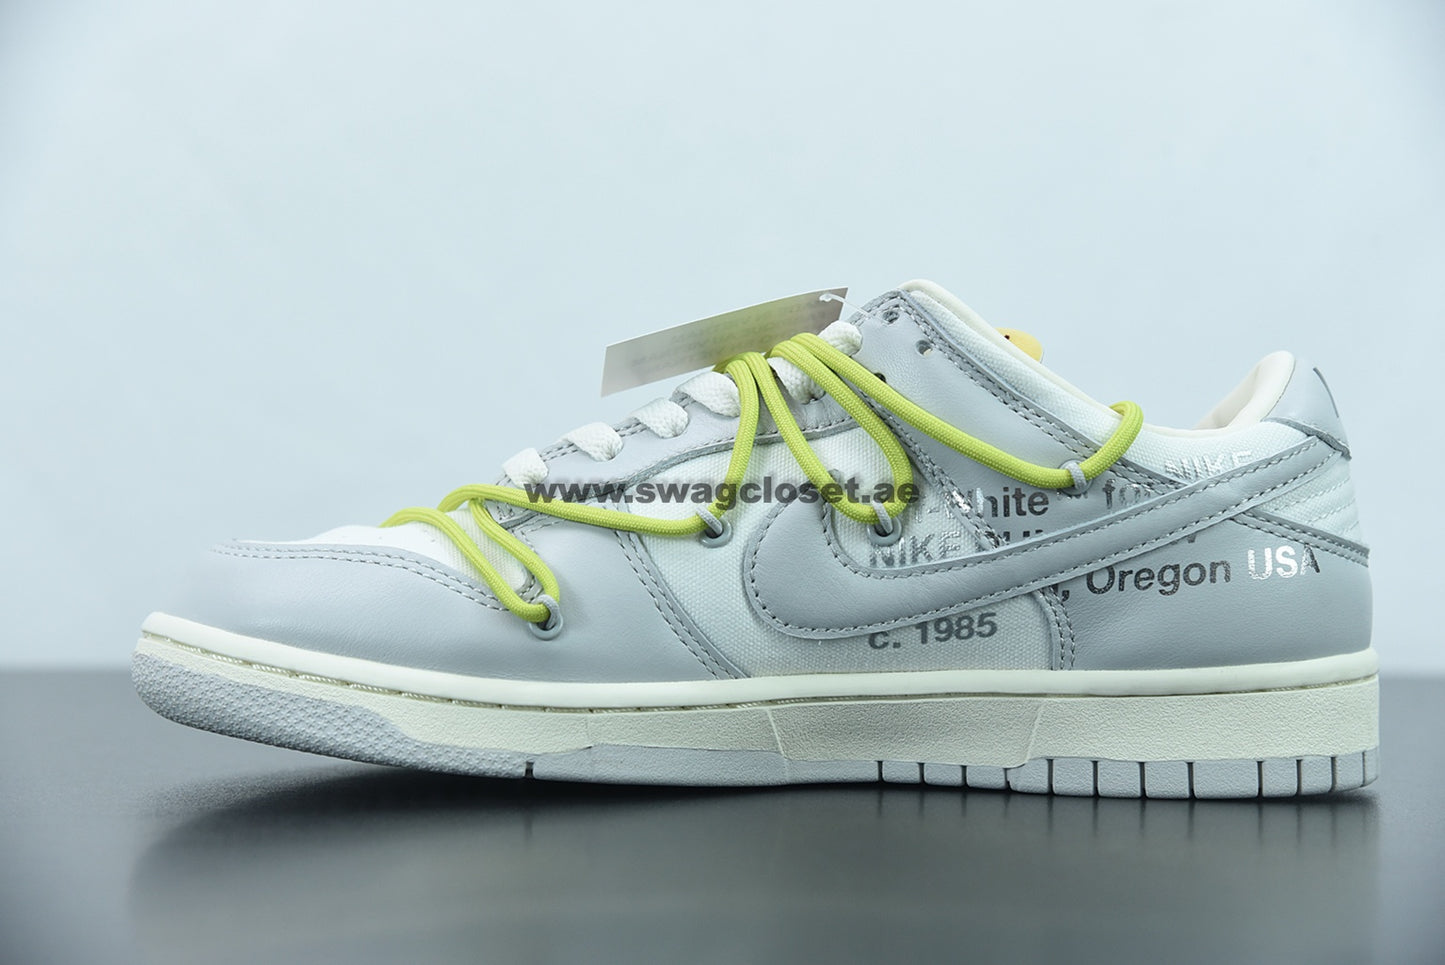 Nike x Off-White dunk low "08 of 50"